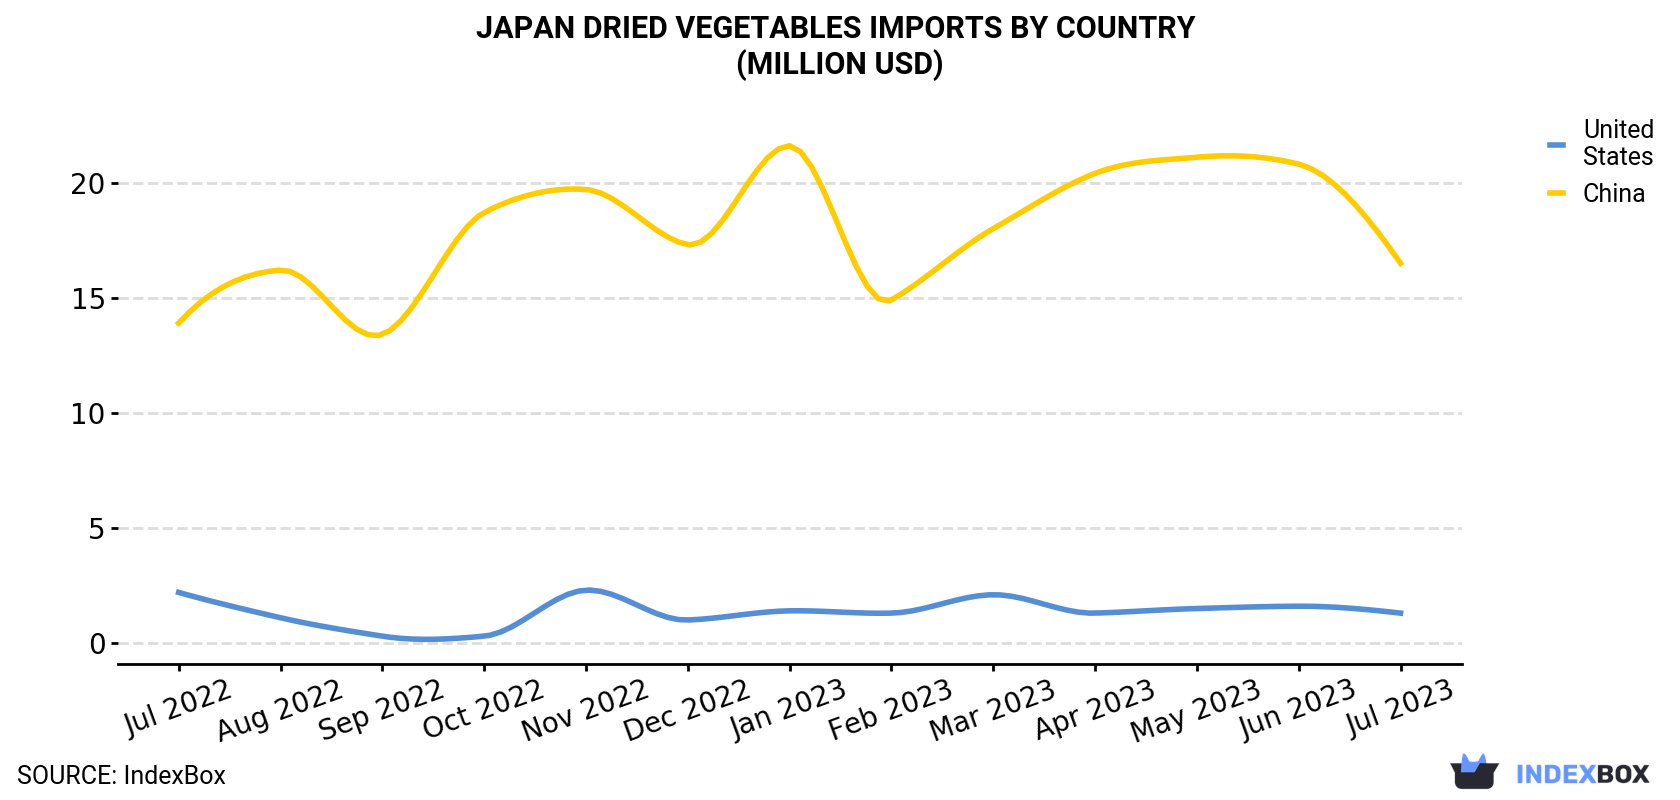 Japan Dried Vegetables Imports By Country (Million USD)